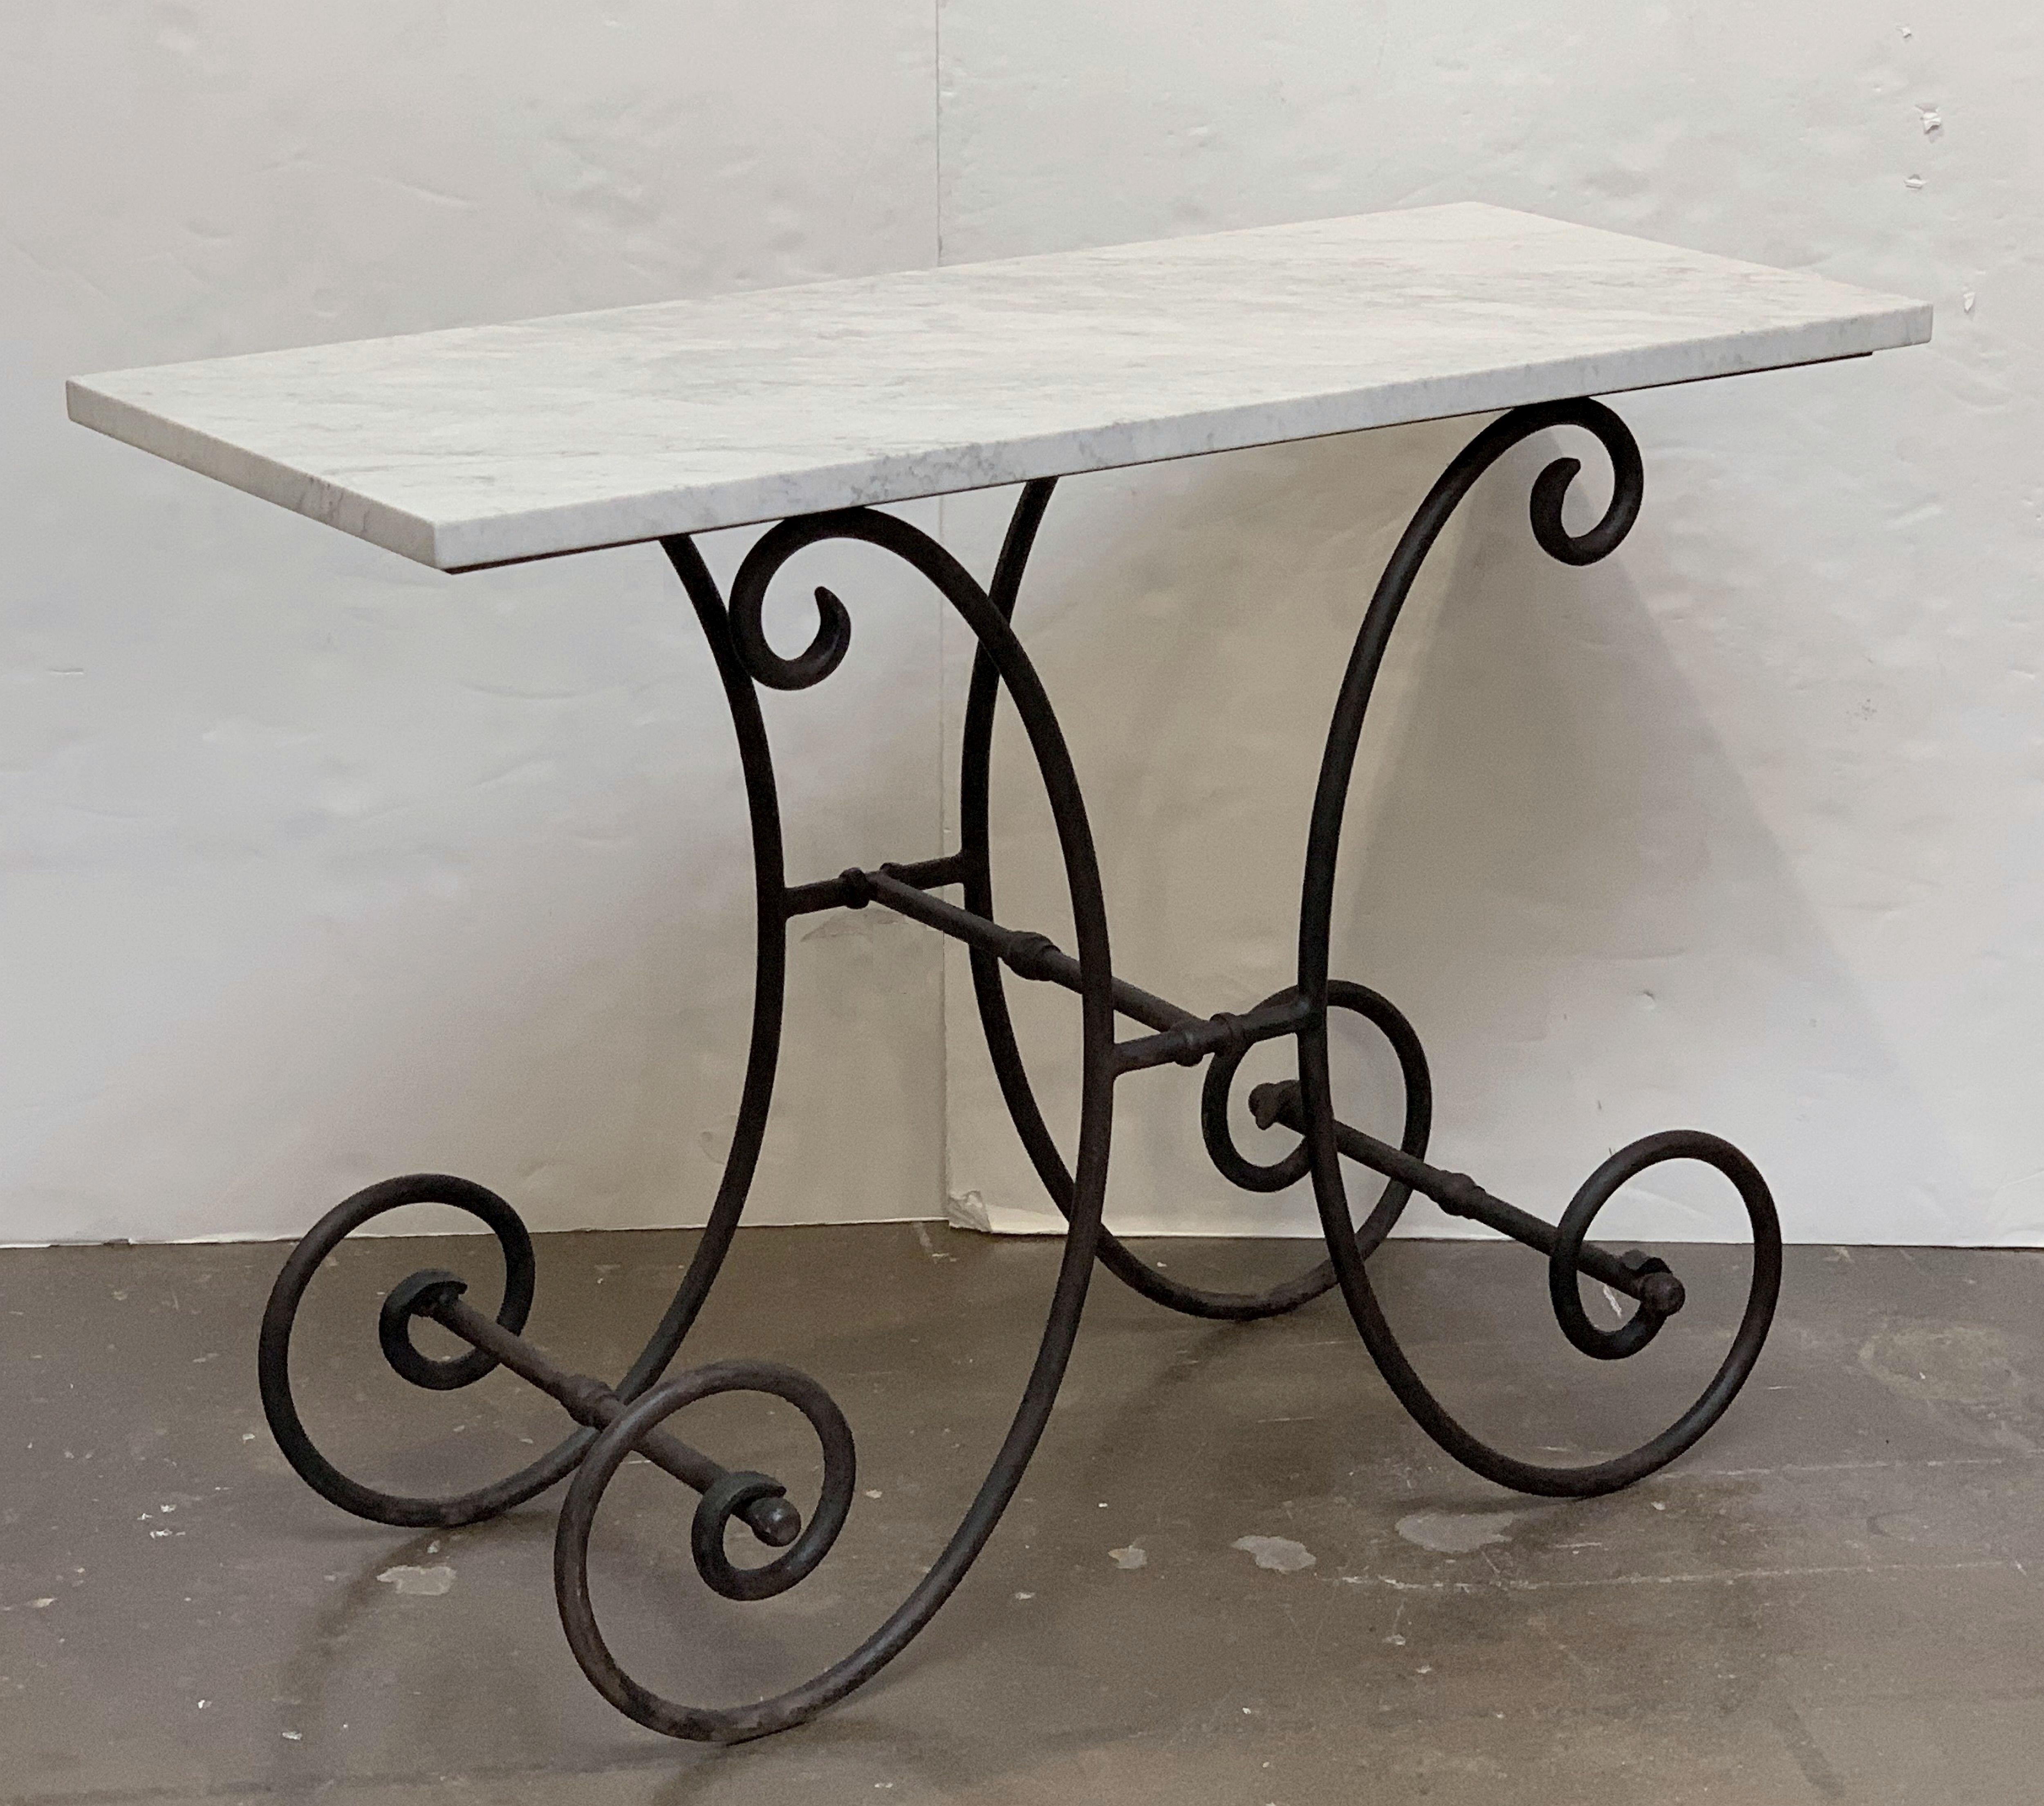 A fine French bakery or pastry maker's table from the late 19th century, featuring a rectangular Carrara marble top set upon a graceful wrought iron frame.

Baker's tables were often used in exclusive hotels and patisseries, perfect as a